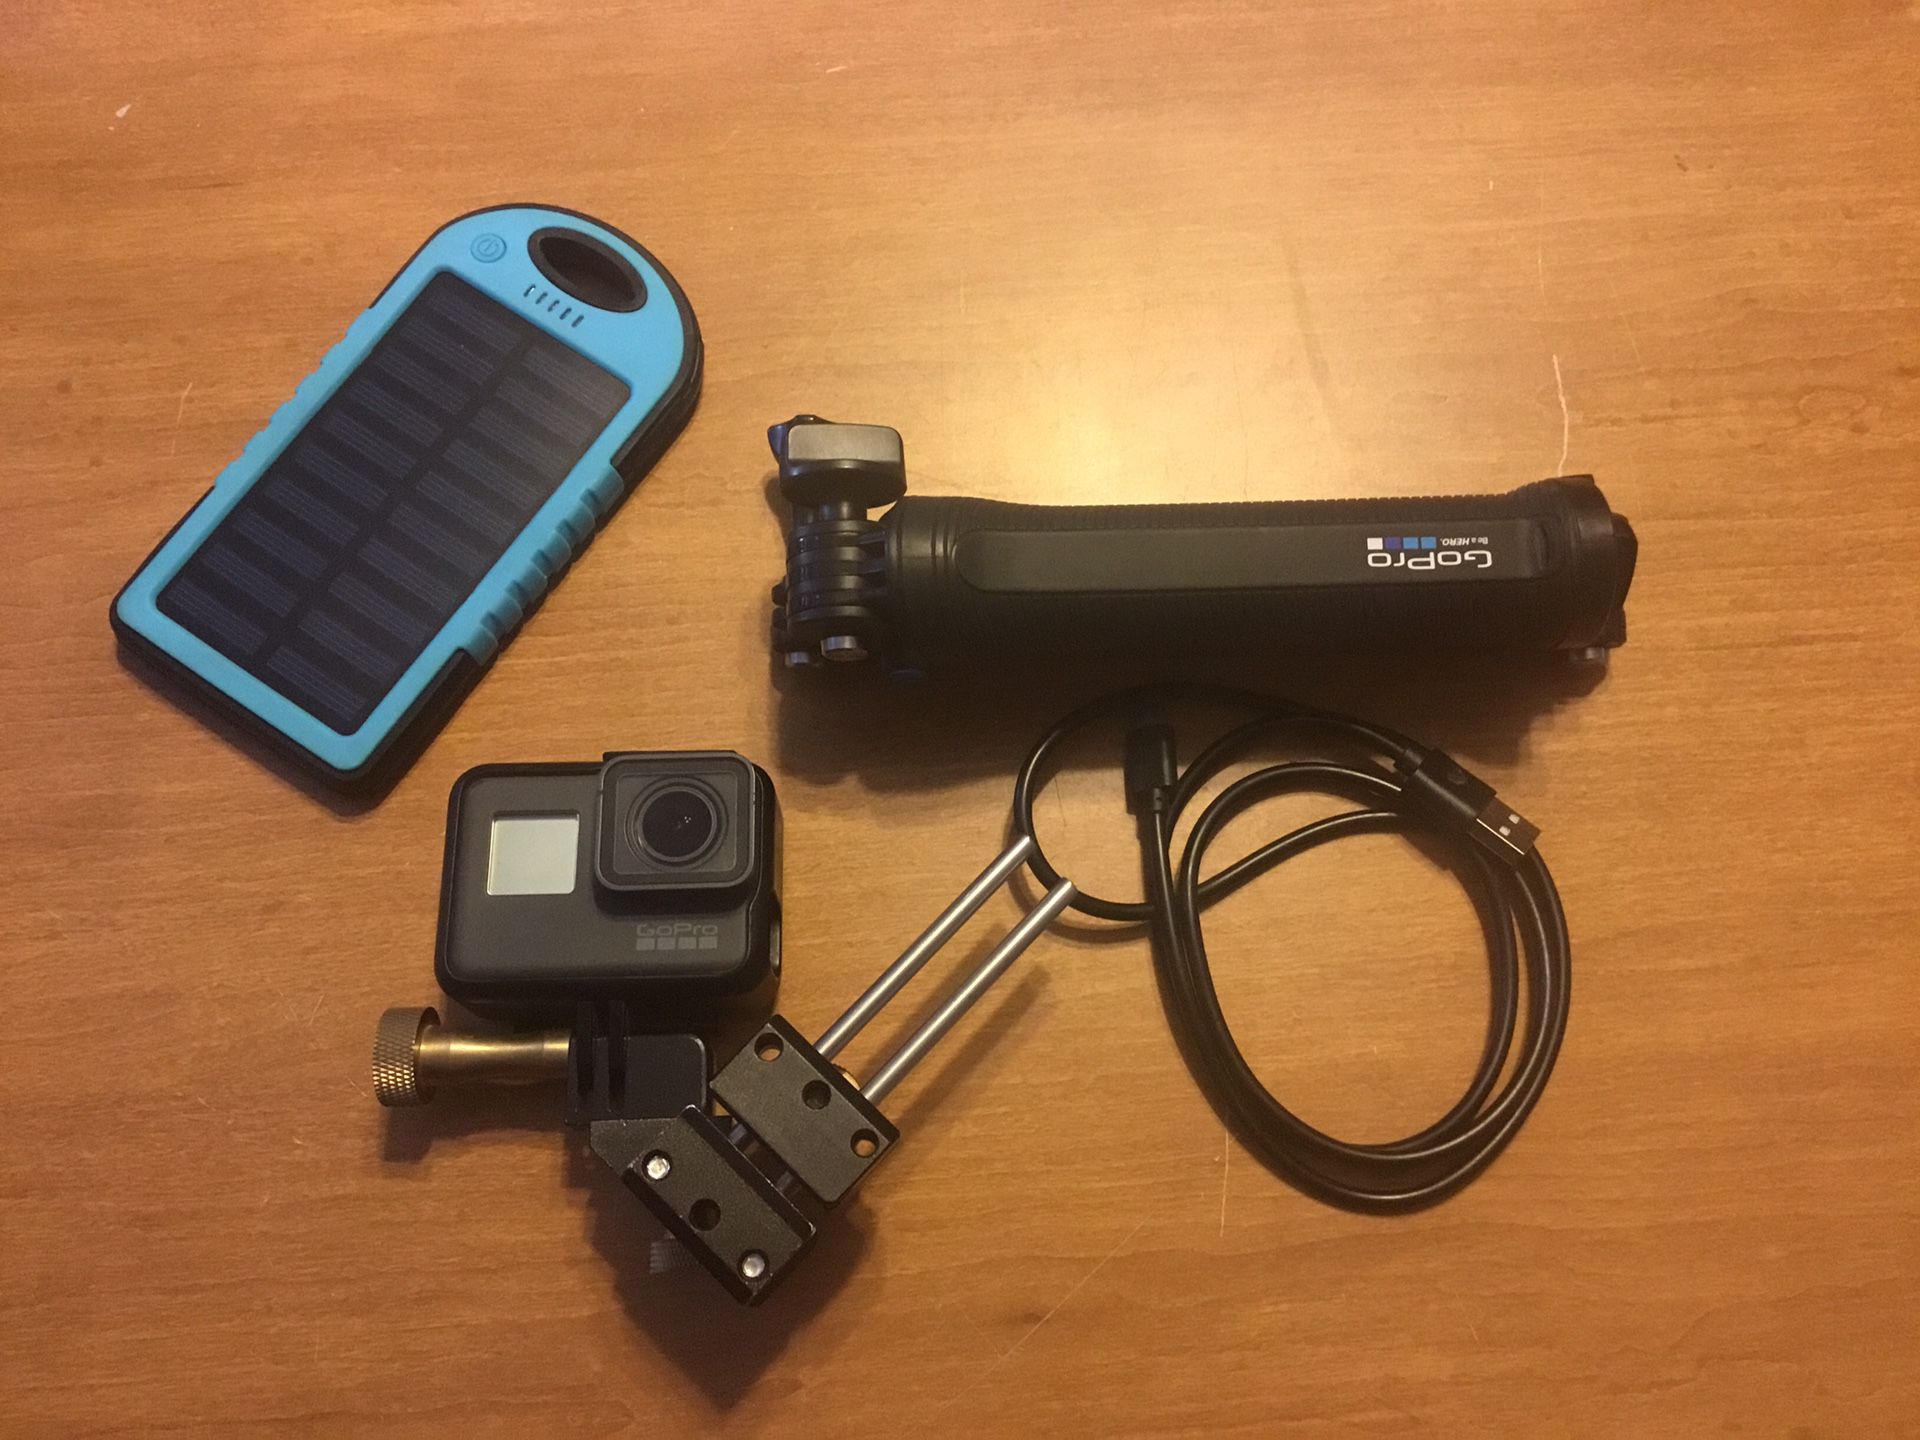 GoPro 5 Hero Black, with cables, tripod, and battery pack to charge if needed